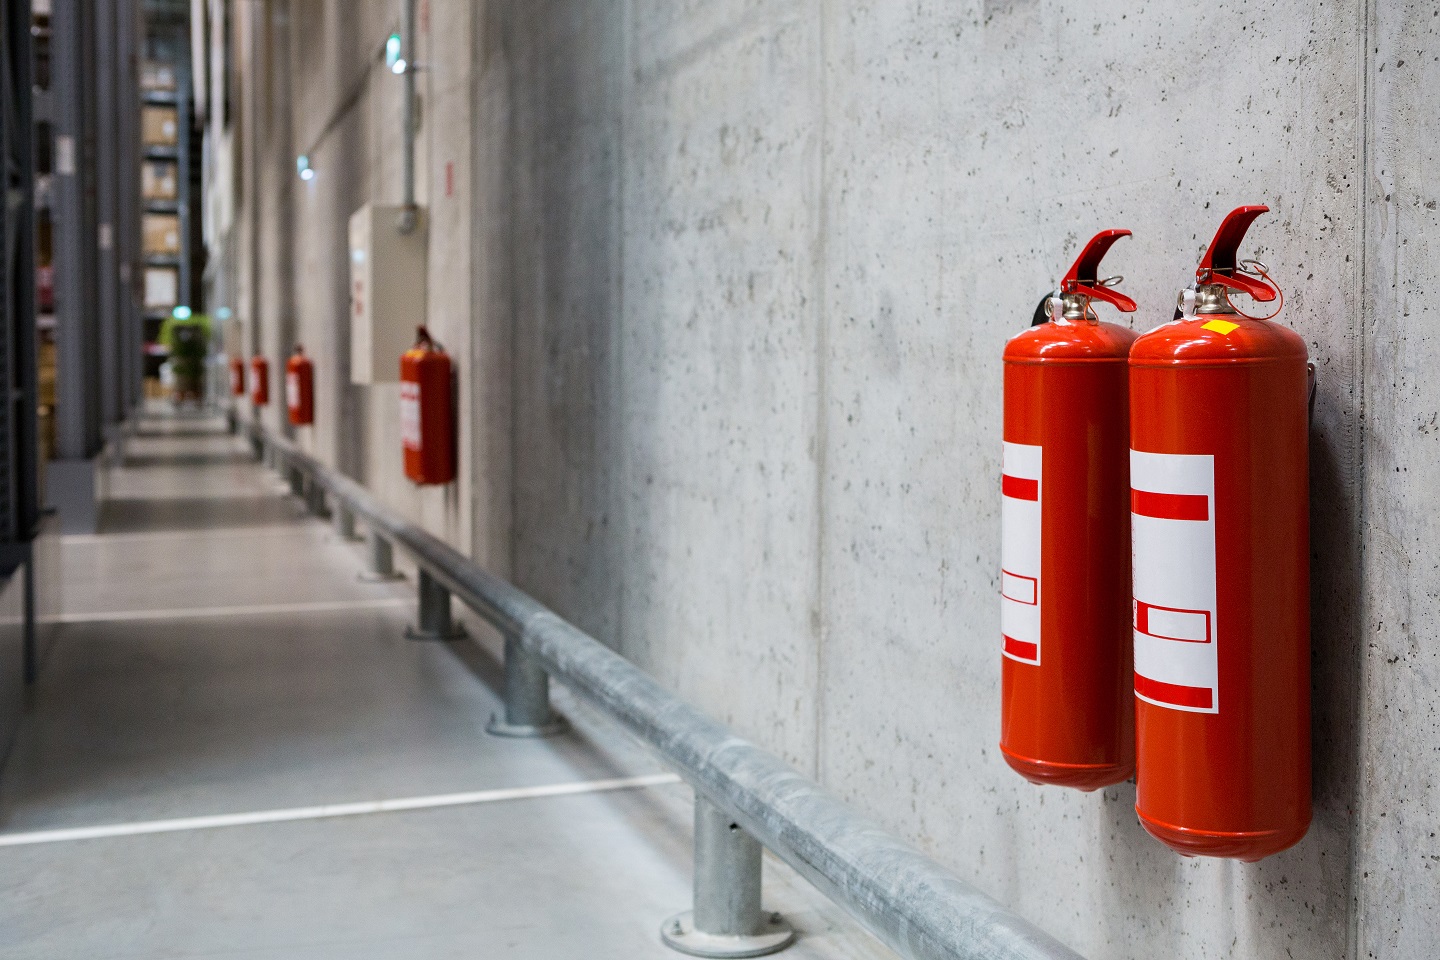 The Benefits of using an Inspection Route when Performing Fire Safety Inspections